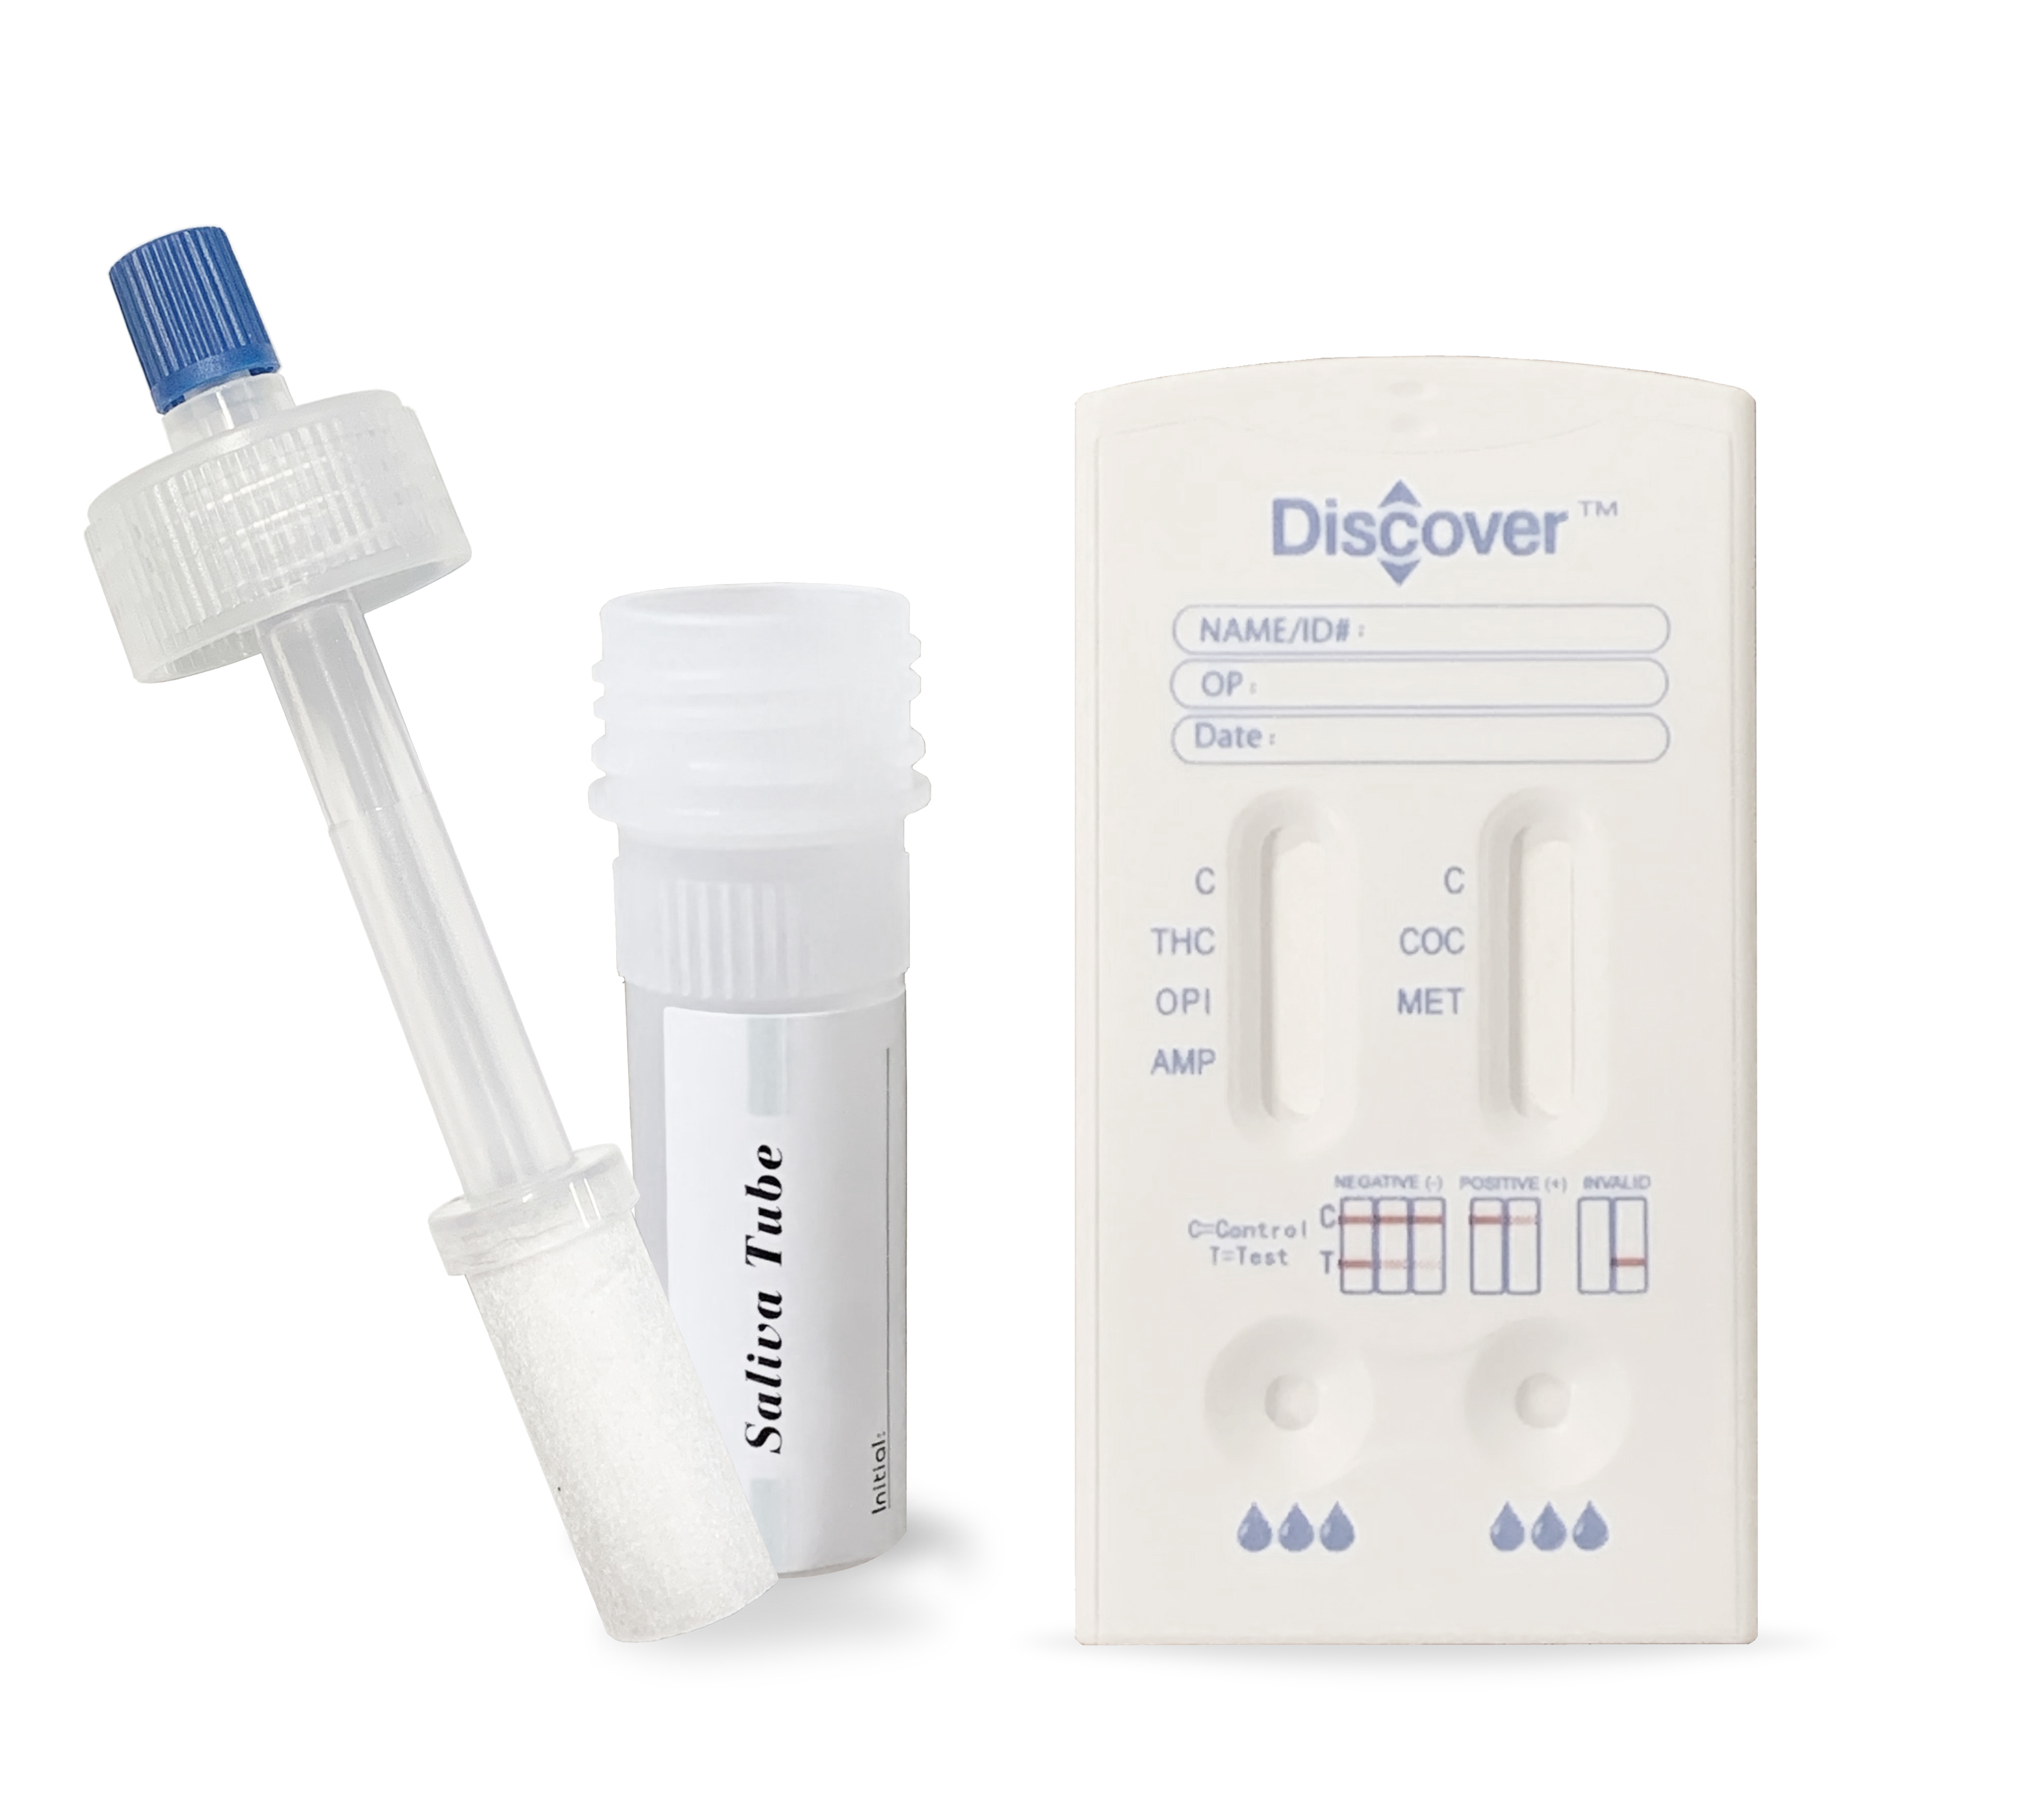 Discover One-Step - 6 Panel Saliva Cassette <span style='font-size:11px; color:#7d7d7d;'><br>THC, COC, OPI, mAMP, AMP, PCP</span>